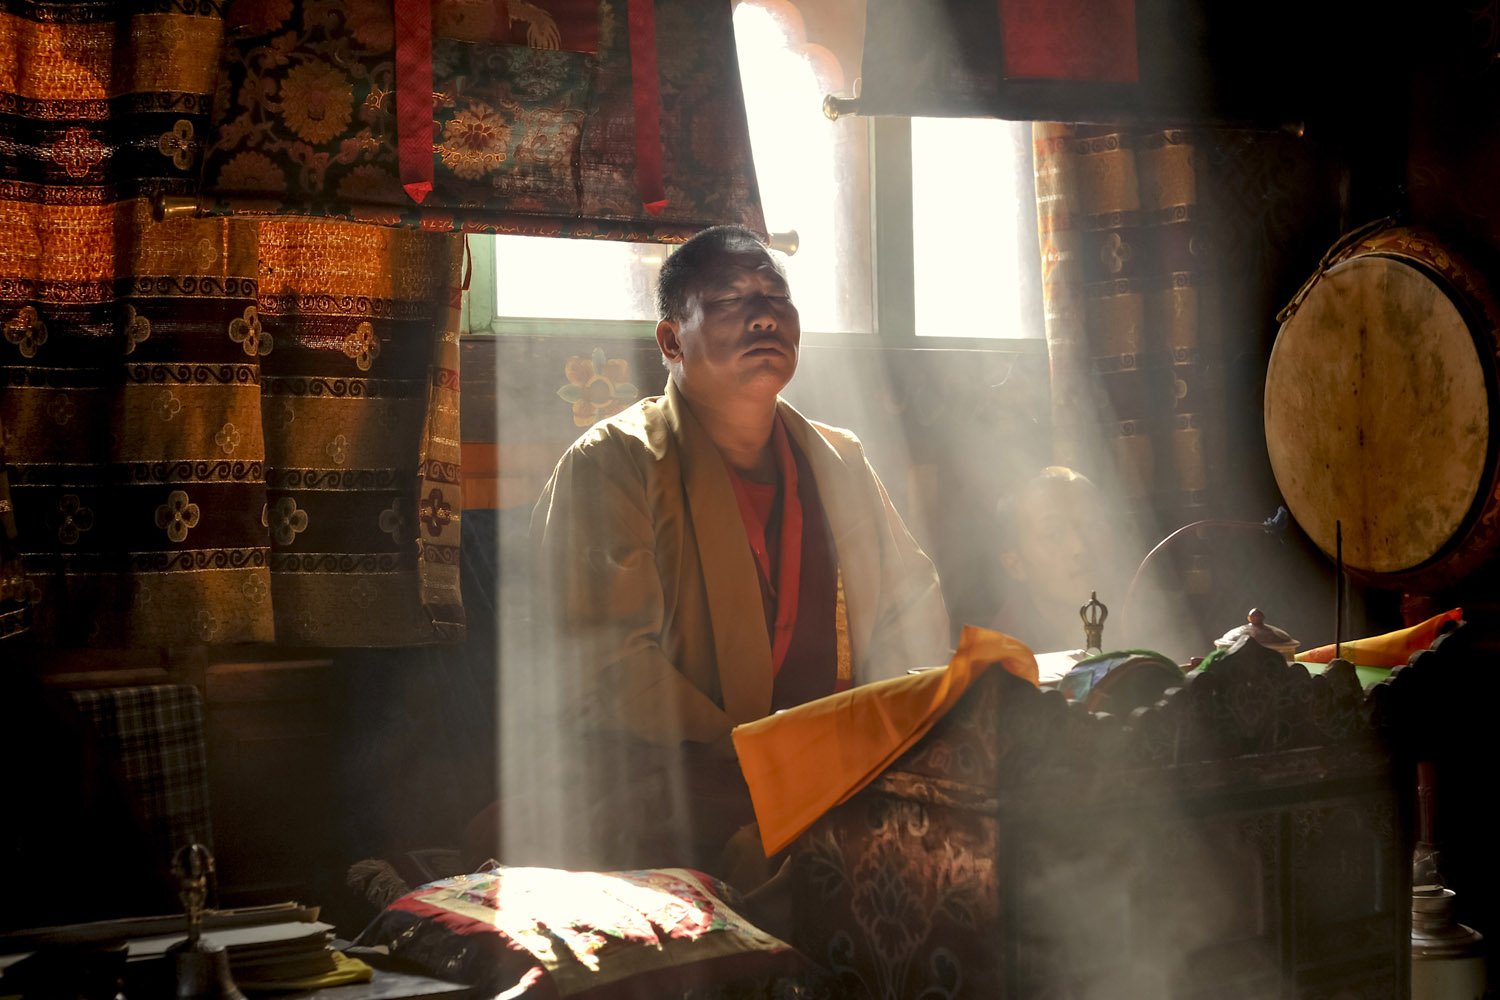 1989: David ButowA monk meditates during a two-day prayer at a private home in Paro, Bhutan. The blessing is intended to instill harmony and good luck, and is part of an annual ritual by many families in this Asian country, where Buddhism is the official national religion. Photographed in 2012, the image is a from a series for the photographic work-in-progress Seeing Buddha, which will be released next year.
                              
                              
                               Just out of college, it was the first time I had been around so many established, highly-regarded photographers and editors. I was struck by how integrated their personalities were with their professional lives. They put so much of themselves into their work, and were in turn shaped by the experiences of being around powerful people or doing exotic or dangerous travel, things most people will never see first hand. I realized then that working at that level was not just a job—it was a life.